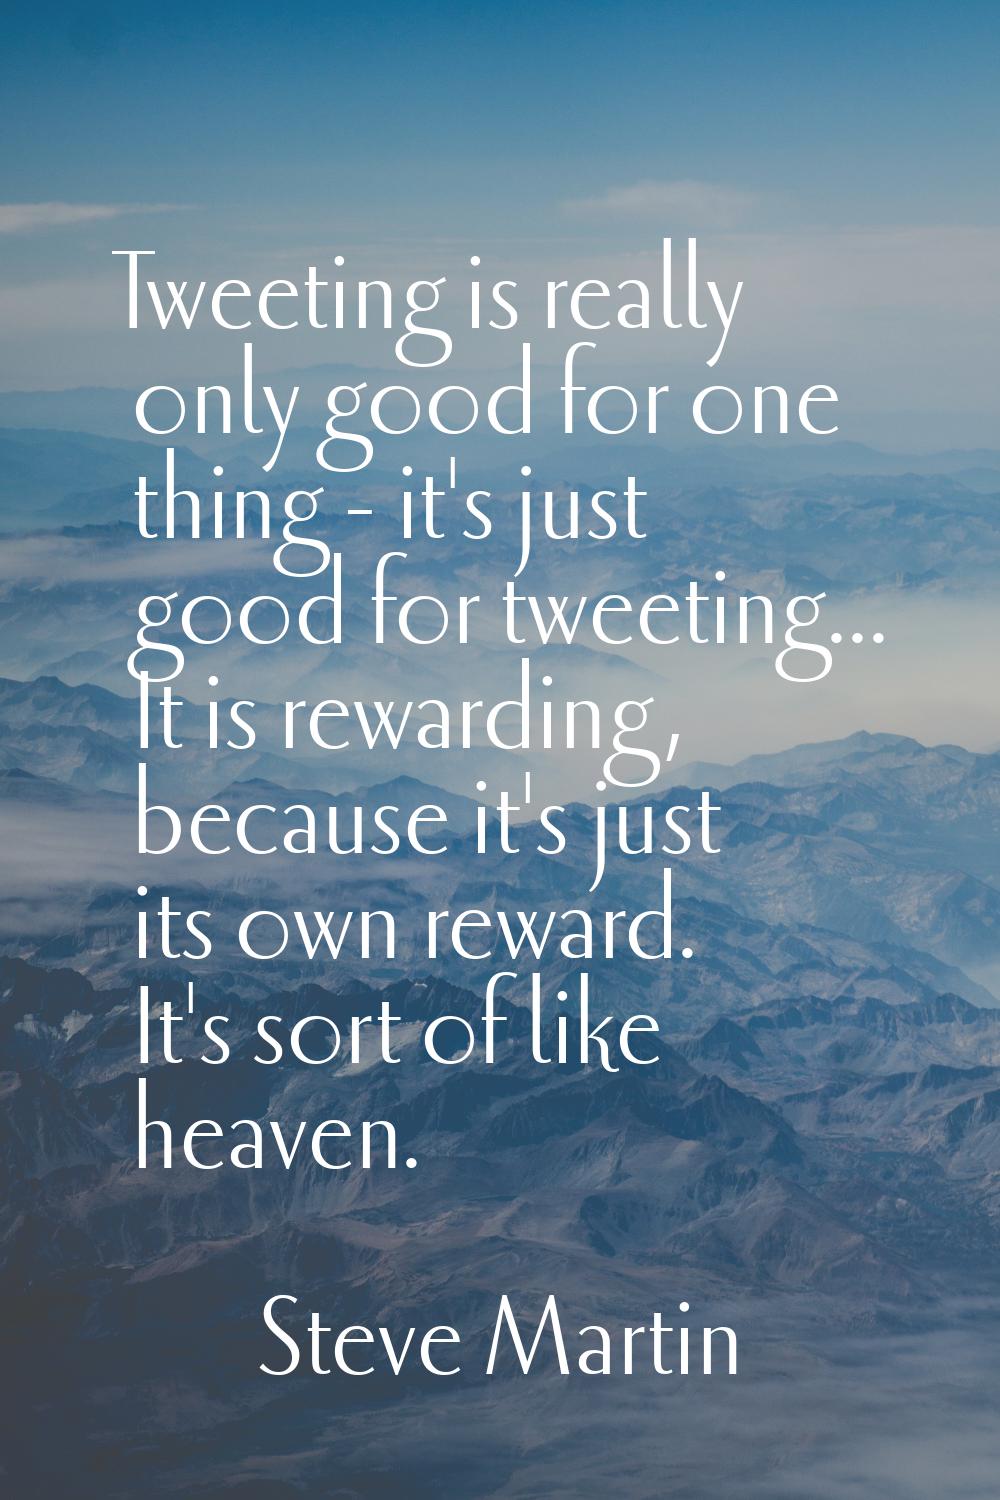 Tweeting is really only good for one thing - it's just good for tweeting... It is rewarding, becaus